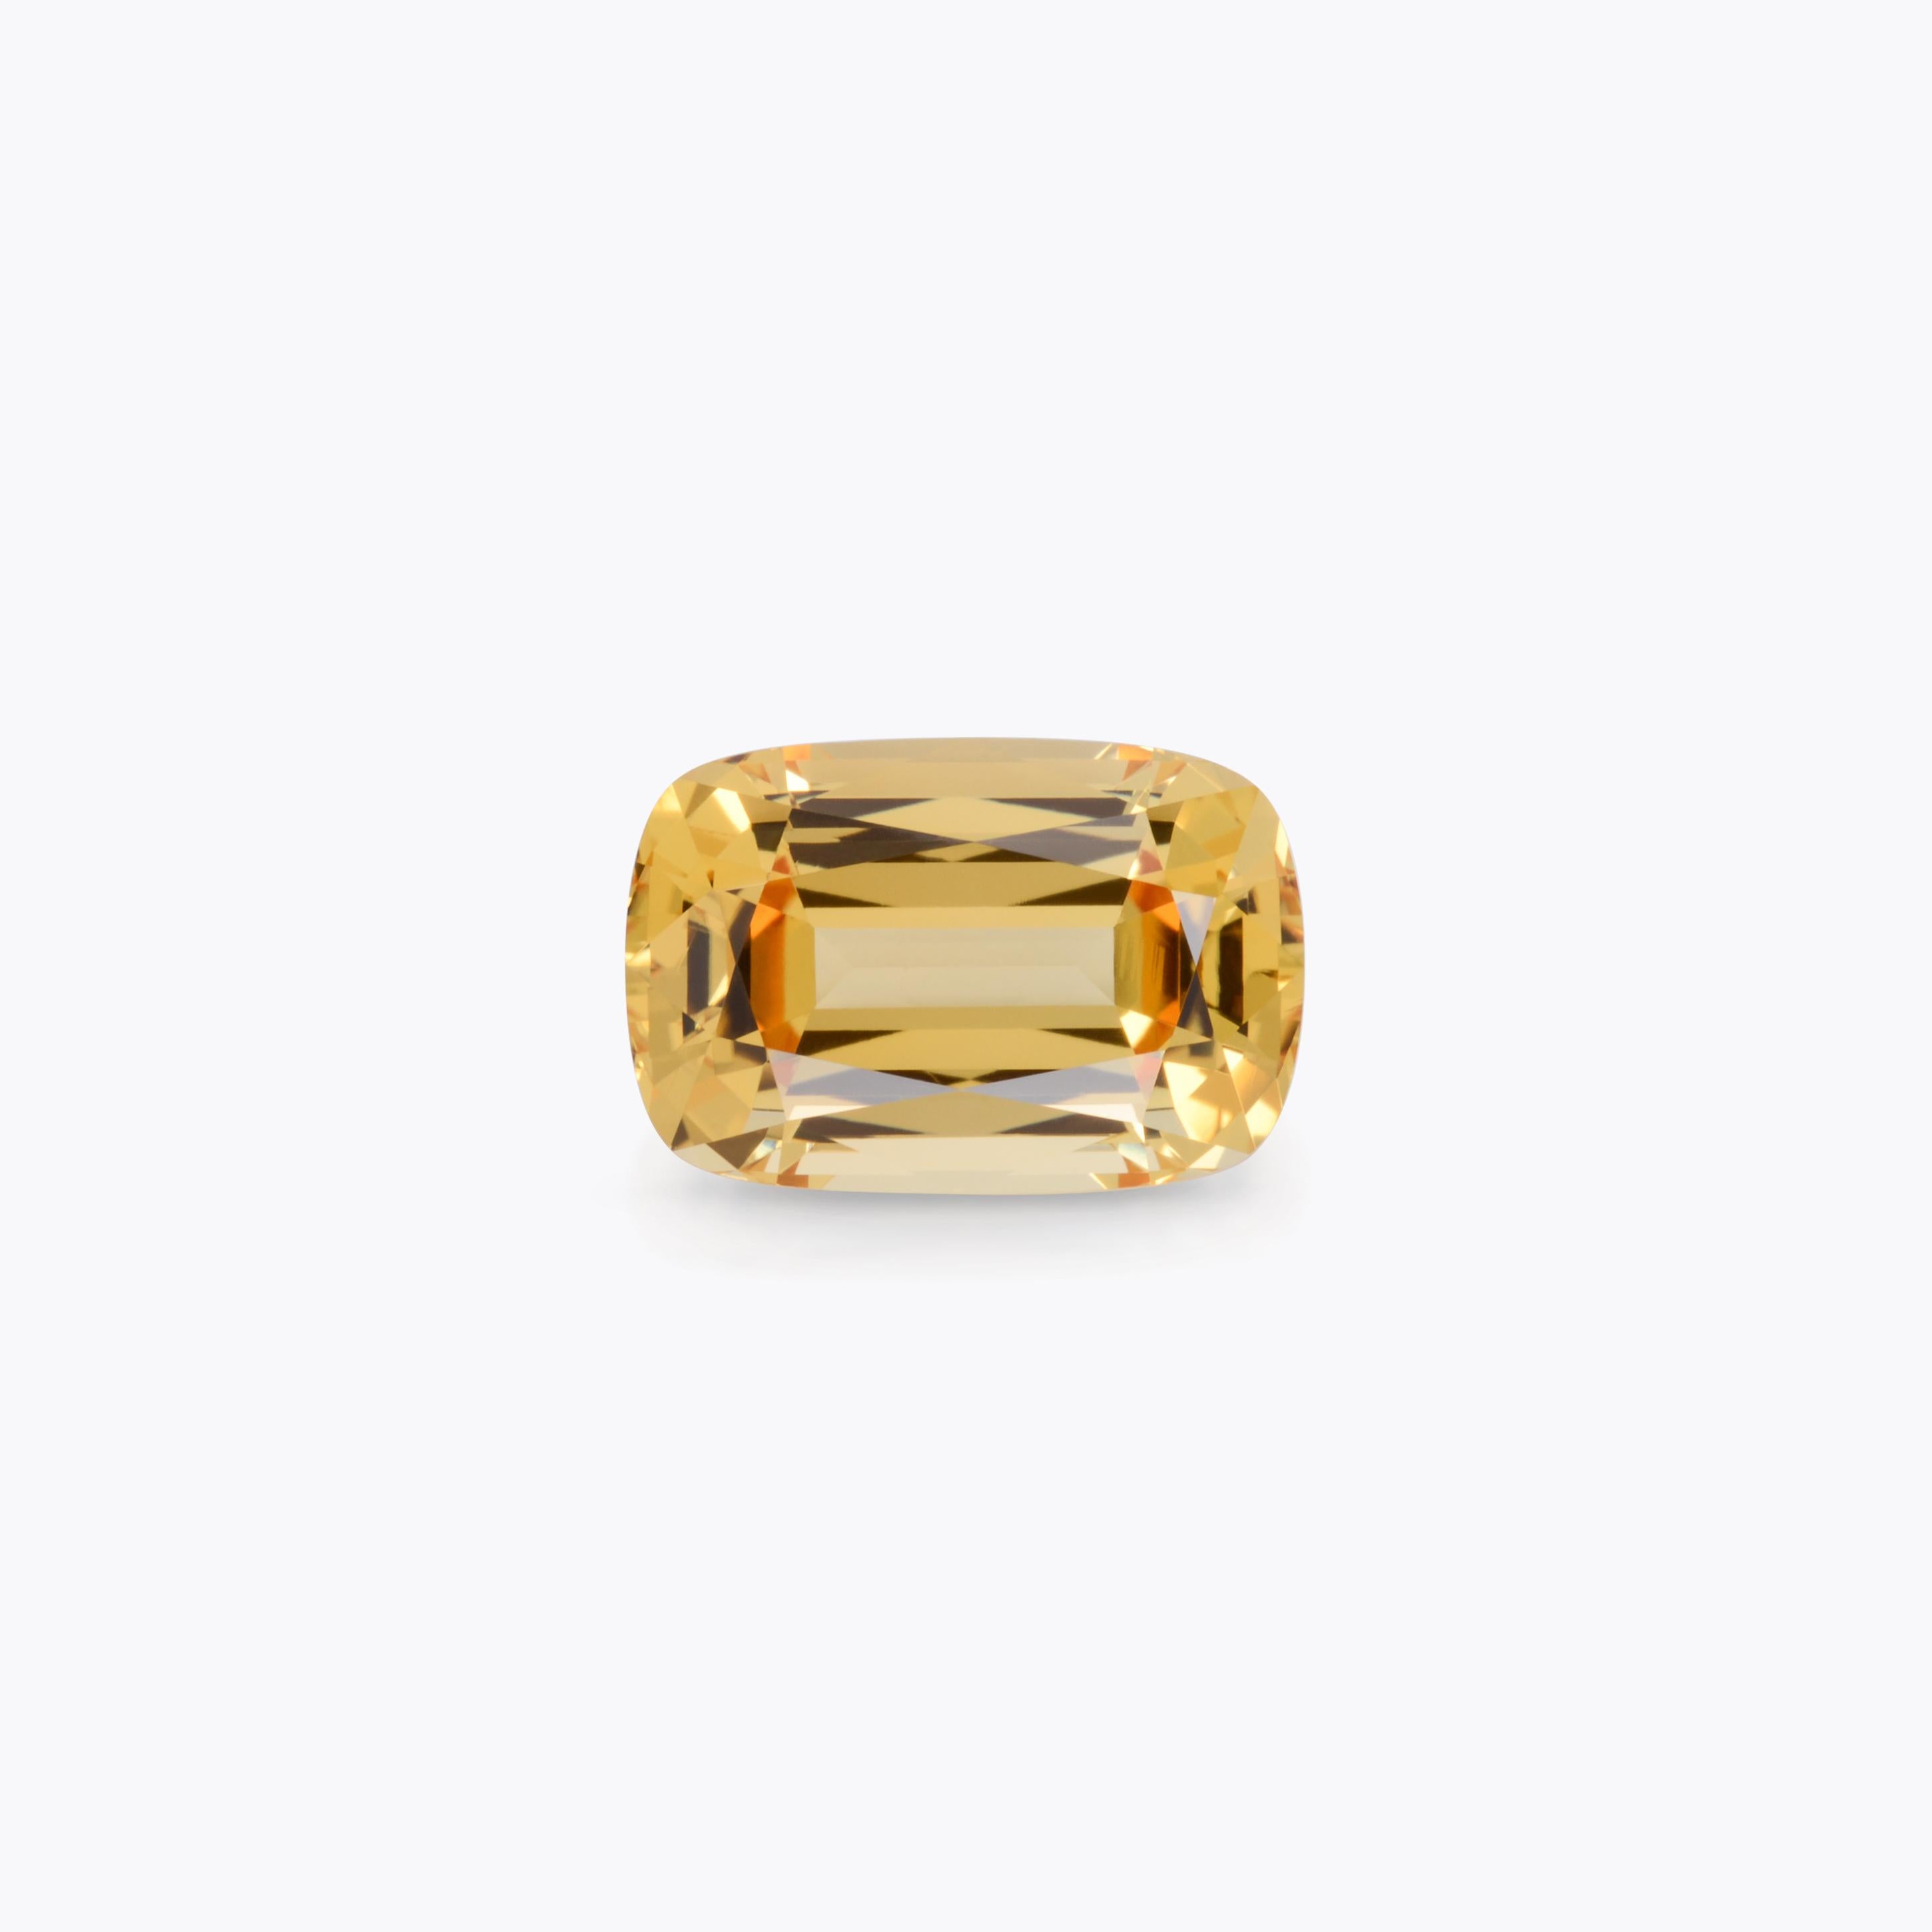 Bright 8.10 carat Brazil Golden Yellow Imperial Topaz cushion unmounted gem, offered loose to someone special.
Returns are accepted and paid by us within 7 days of delivery.
We offer supreme custom jewelry work upon request. Please contact us for